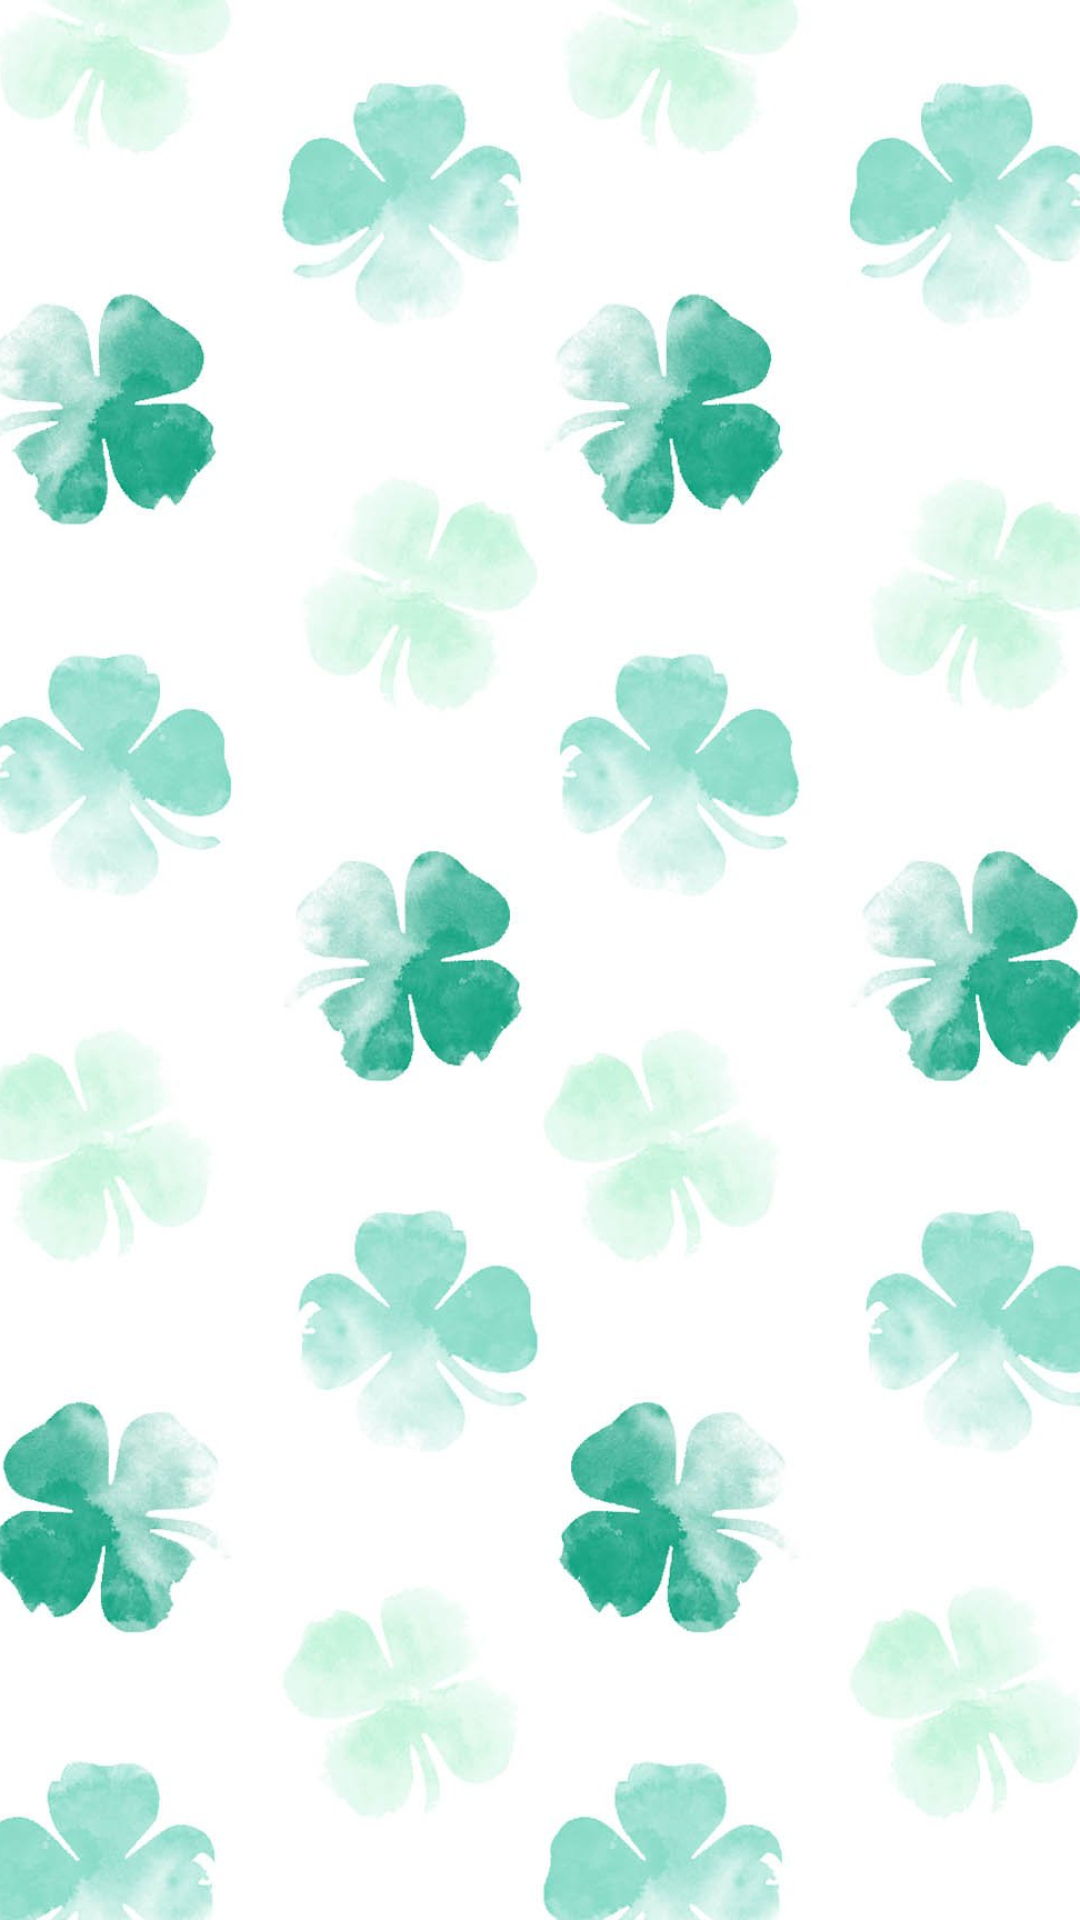 1080x1920 st patrick lucky green watercolor shamrock clovers free wallpaper by Audrey Chenal Audrey Chenal